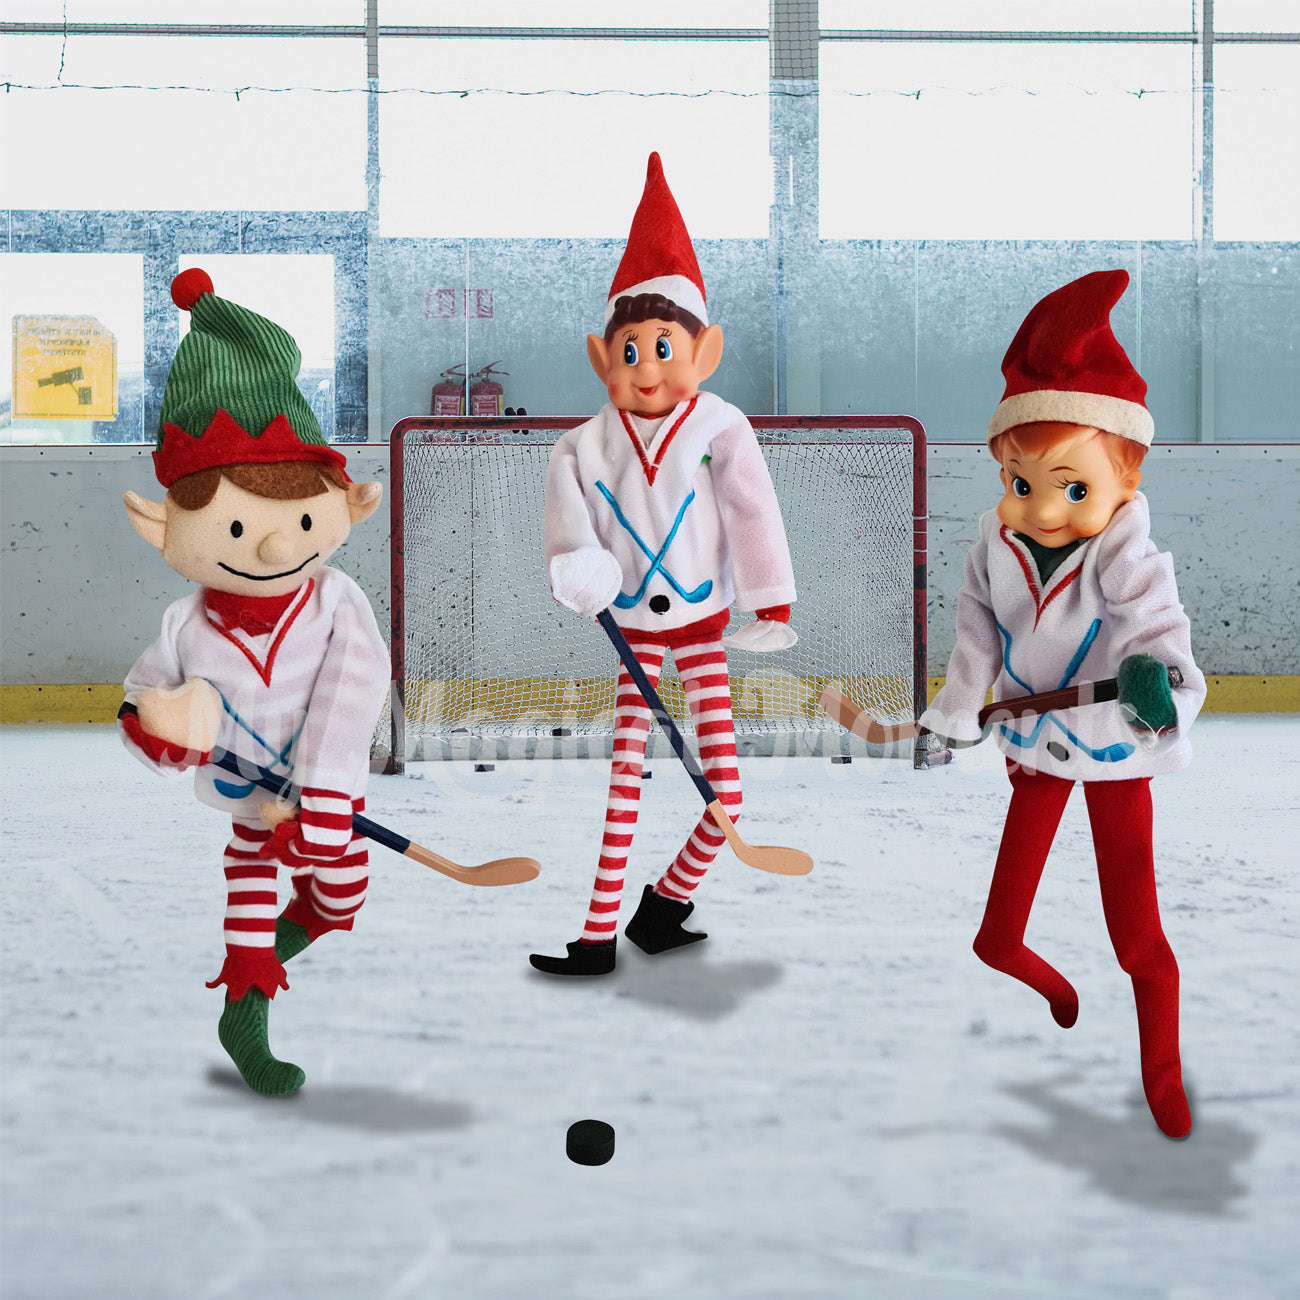 Elves playing hockey on ice with jerseys, hockey sticks and puck